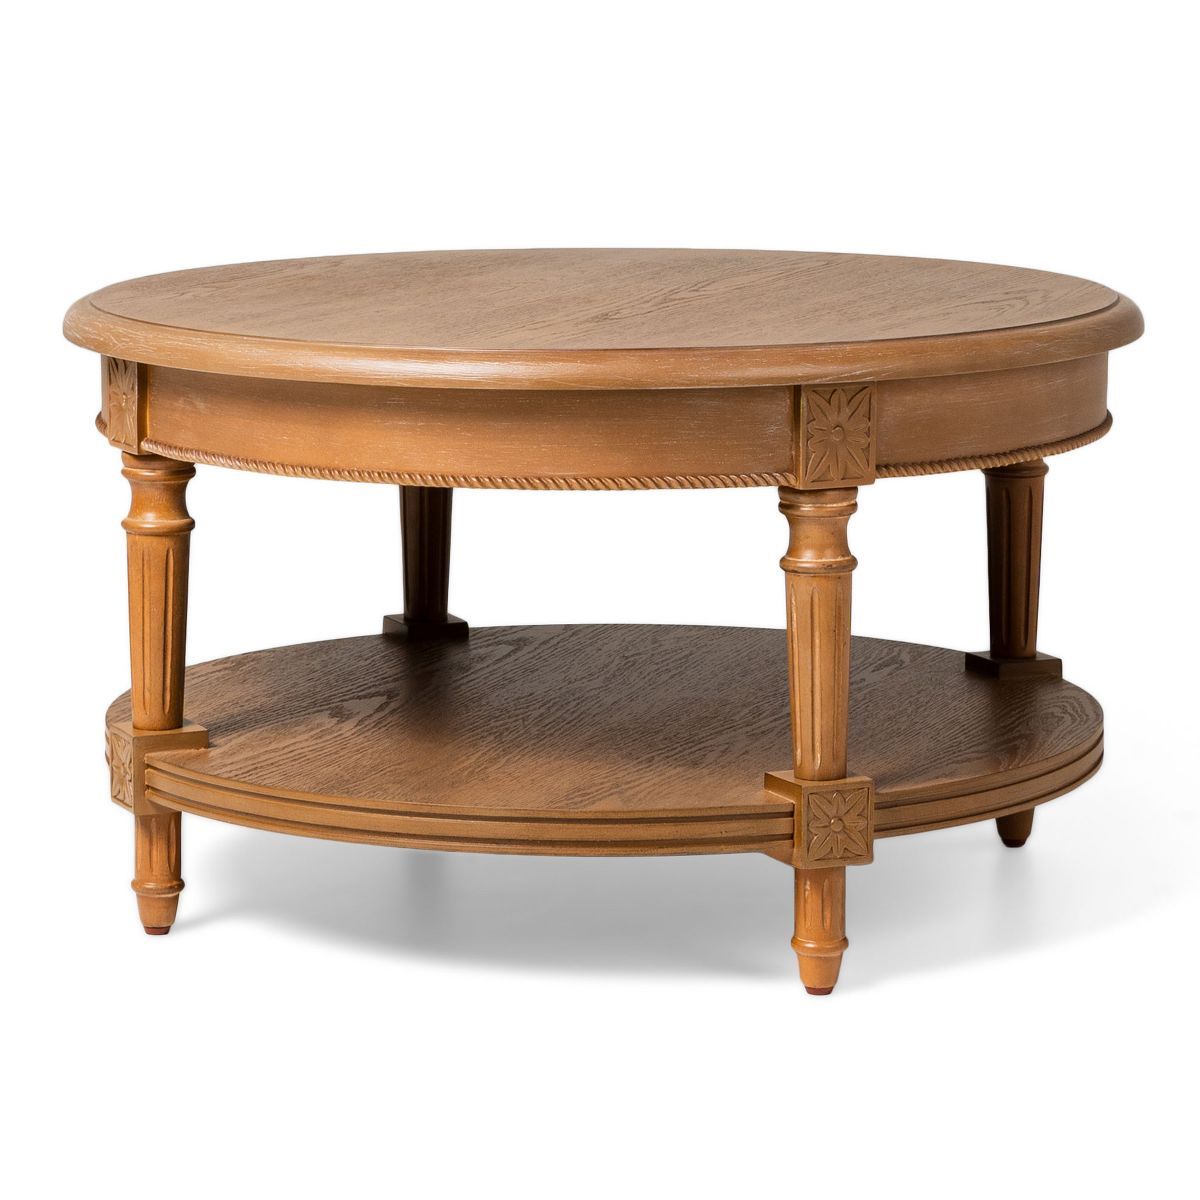 Maven Lane Pullman Traditional Round Wooden Coffee Table | Target